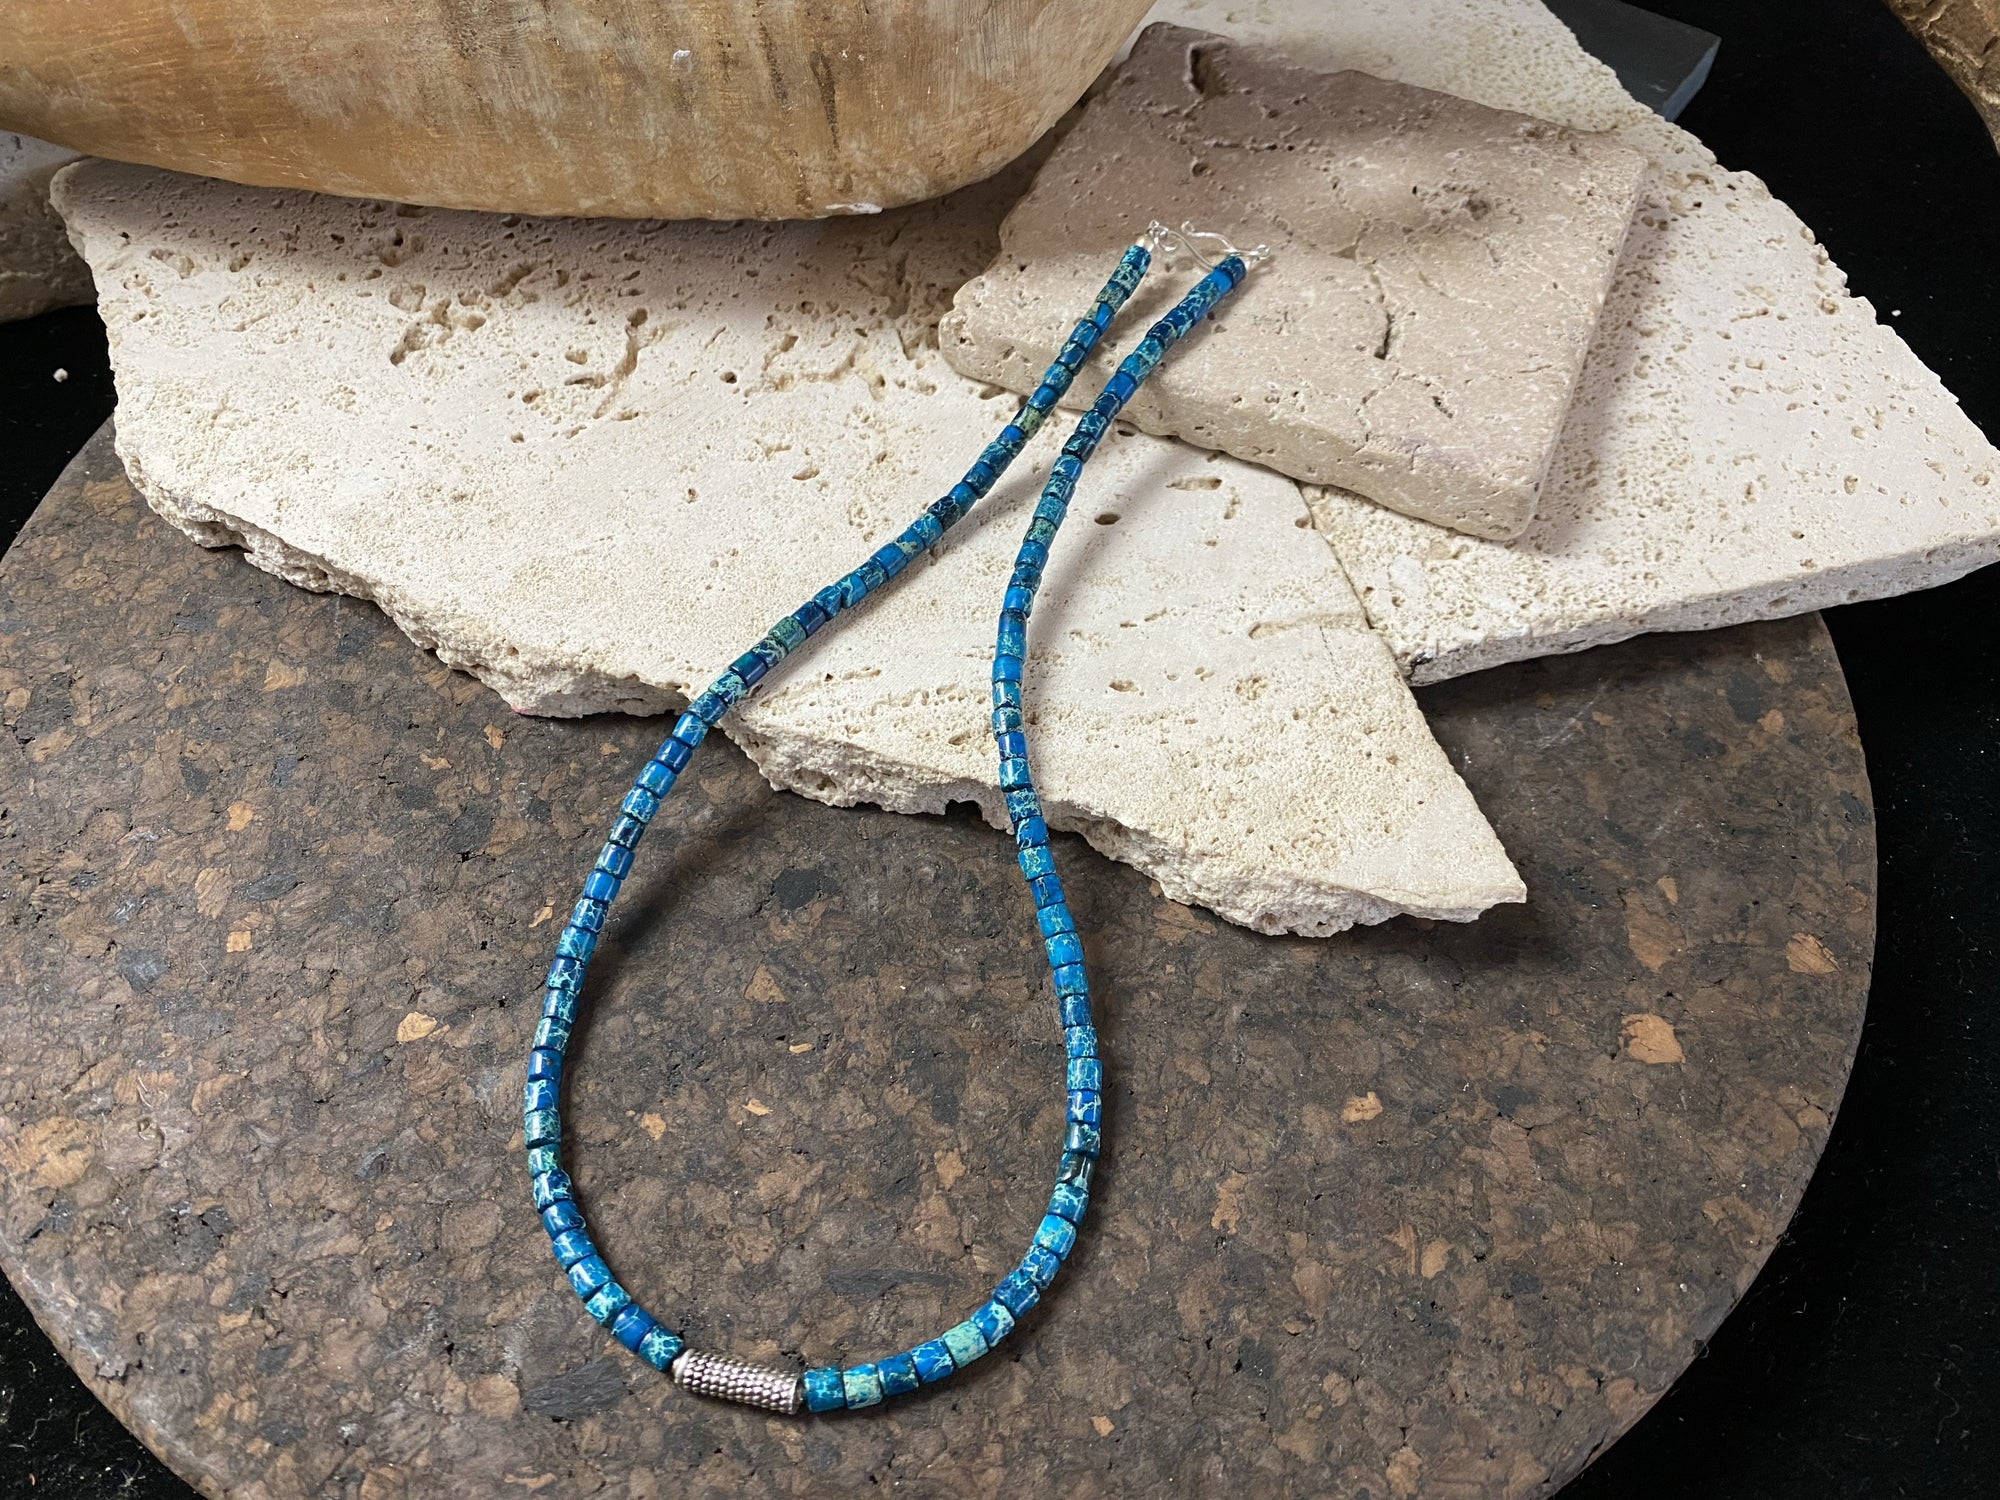 Strong blue green necklace crafted from natural blue jasper, with a heavy vintage silver bead as a centrepiece. Finished with sterling silver ends.  This is a unisex necklace that would look great on a guy or a woman. Length 46 cm (18")